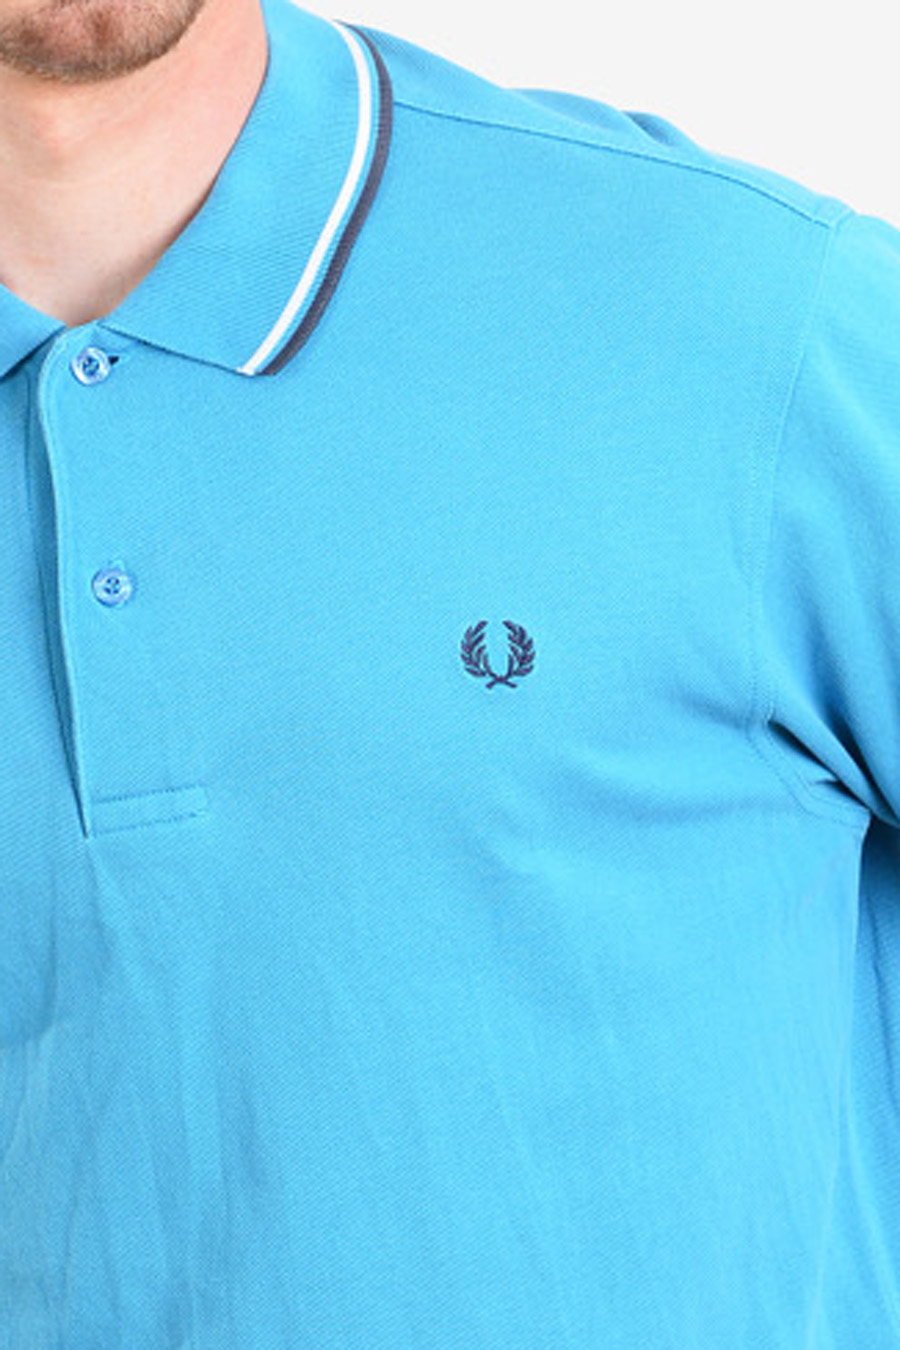 Fred Perry Vintage Polo Shirt | Size L - Brick Vintage